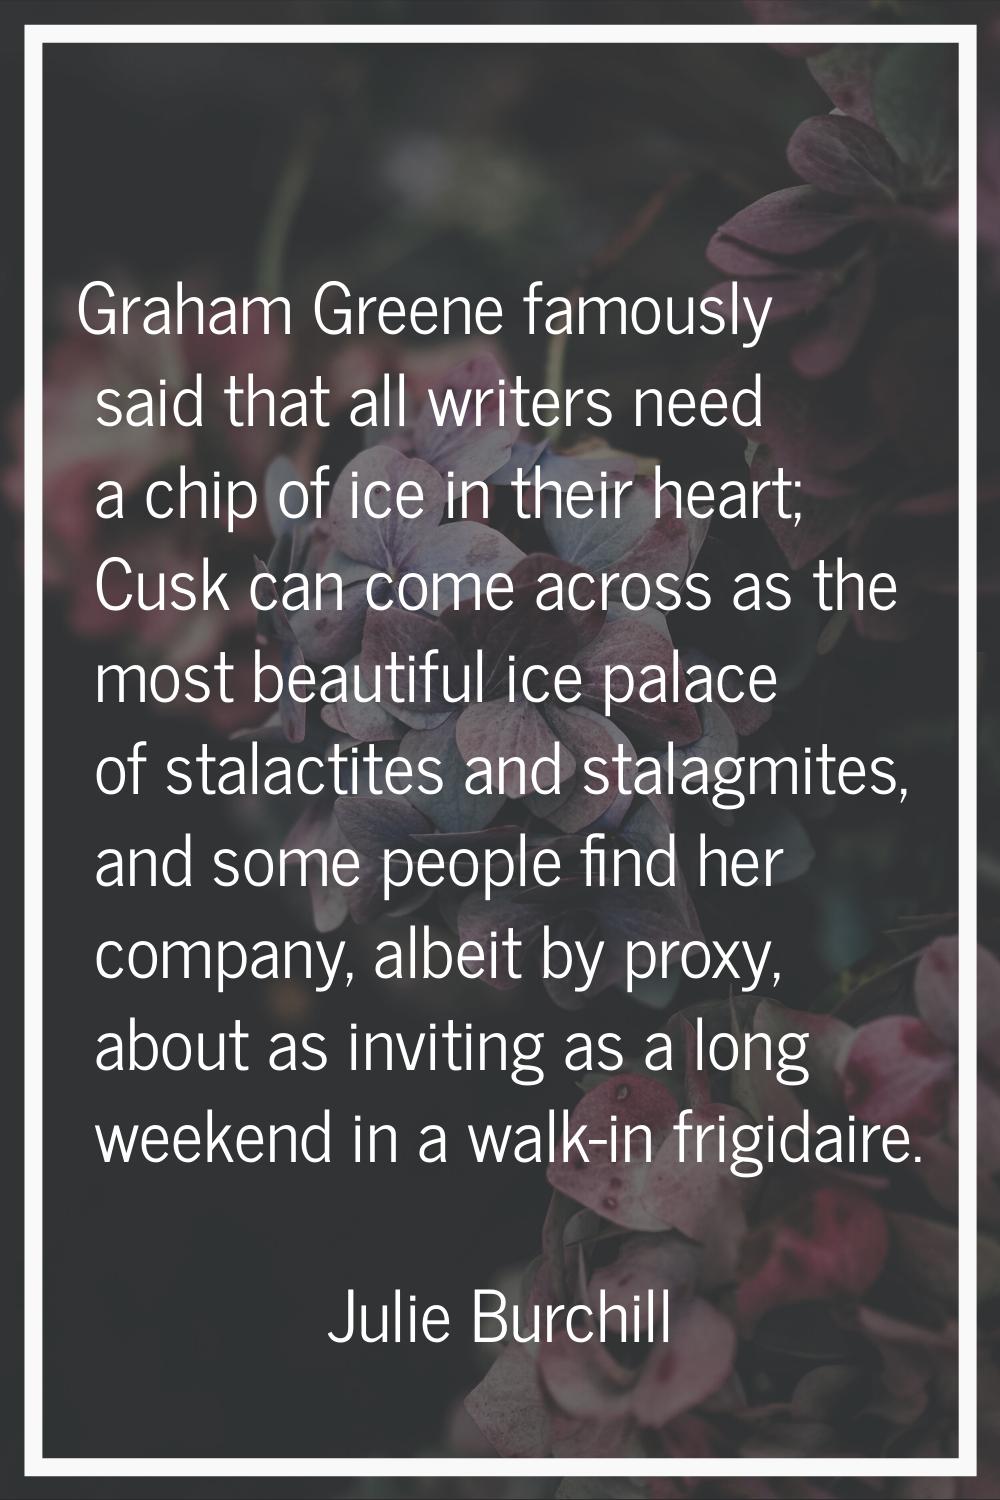 Graham Greene famously said that all writers need a chip of ice in their heart; Cusk can come acros